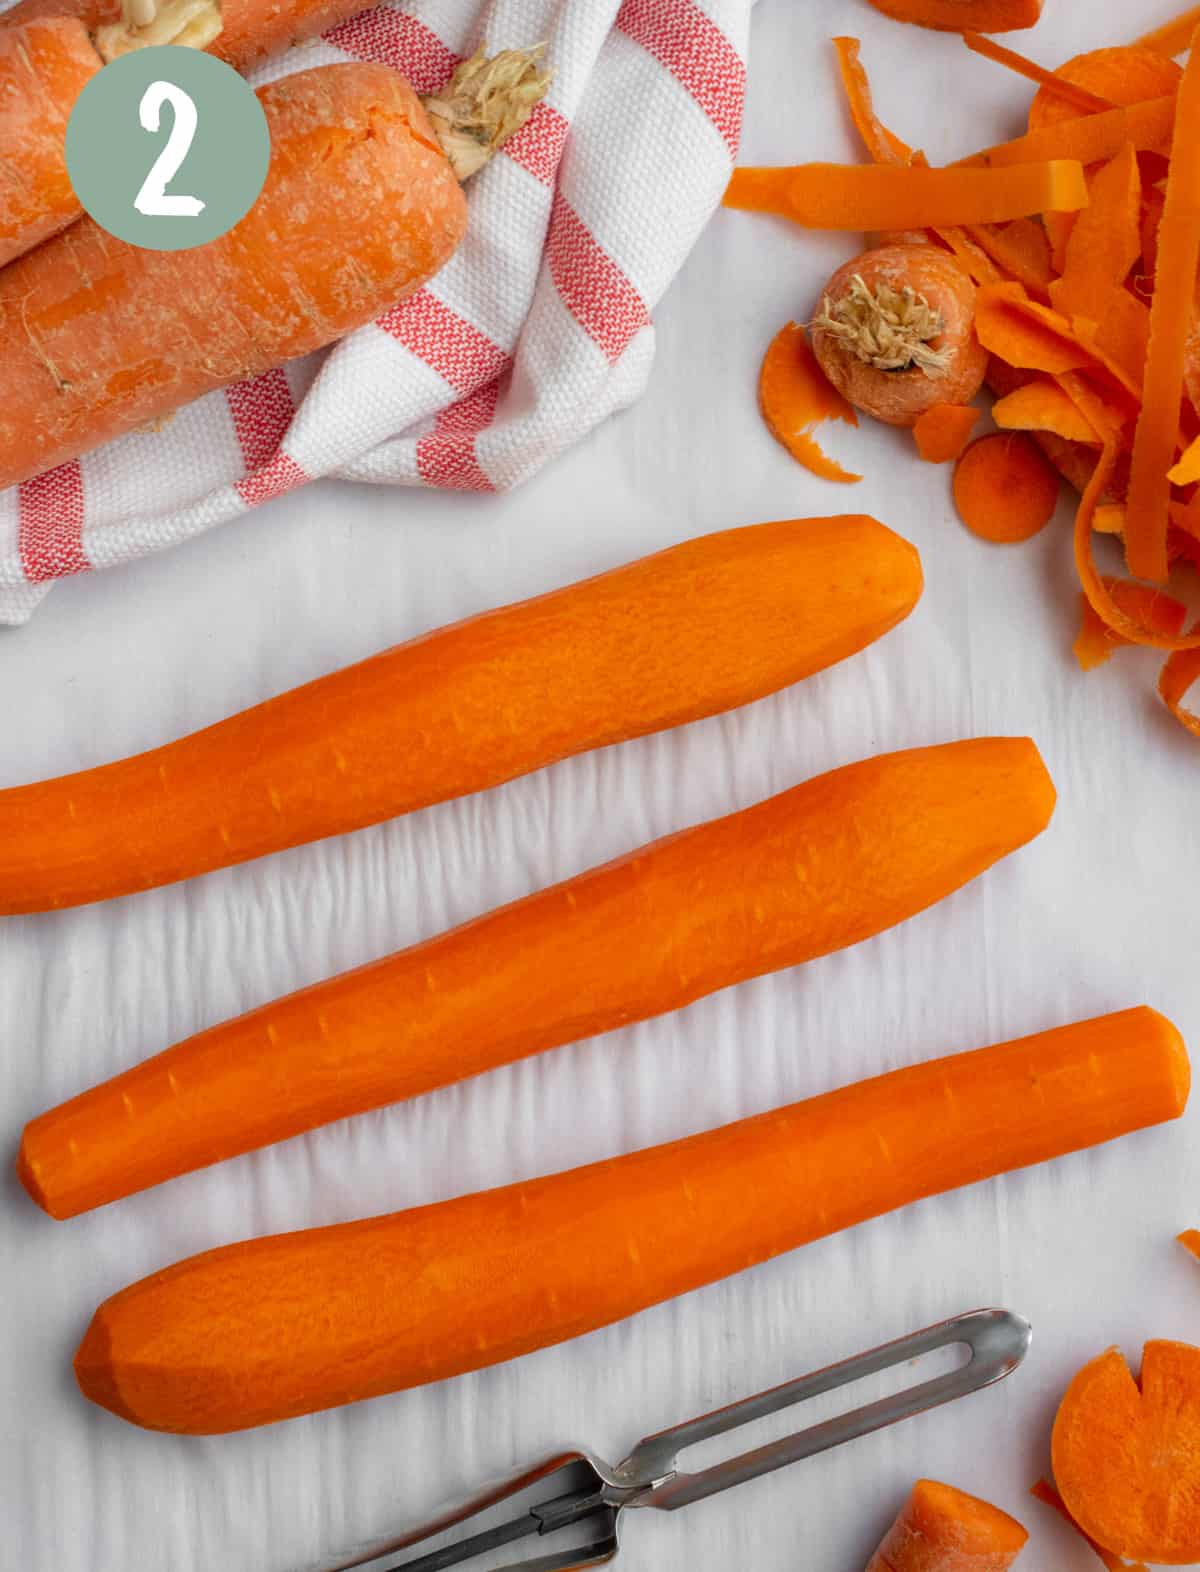 Three carrots peeled and ends rounded to resemble a hotdog.